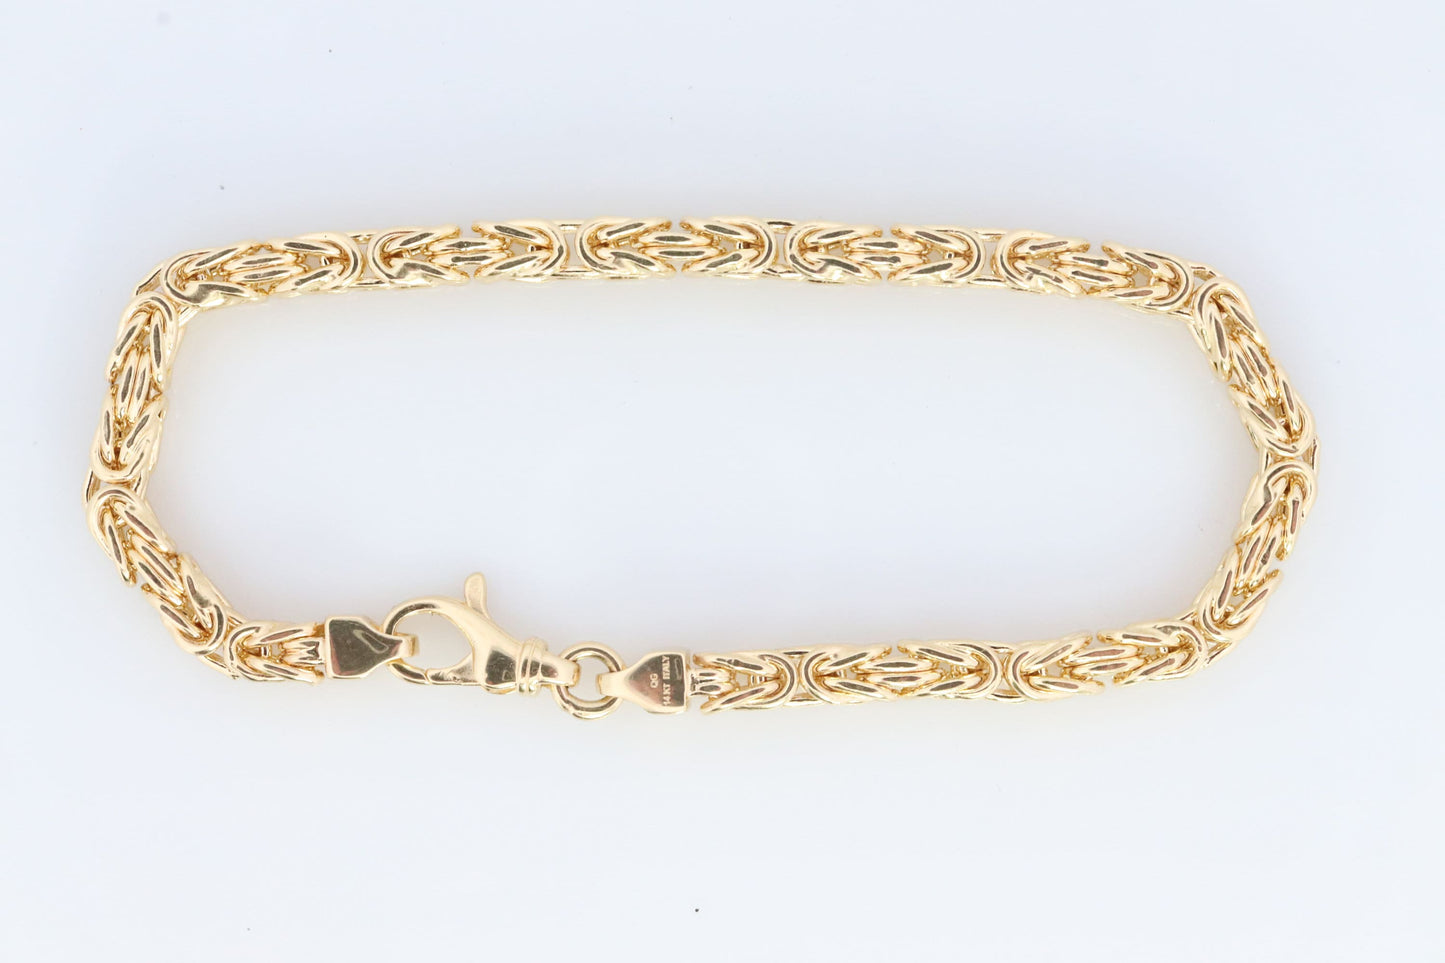 Byzantine Square Bracelet. 14k Yellow Gold 585 7.25mm length 3.5mm wide. ITALY Made. Bracelet for Him or Her